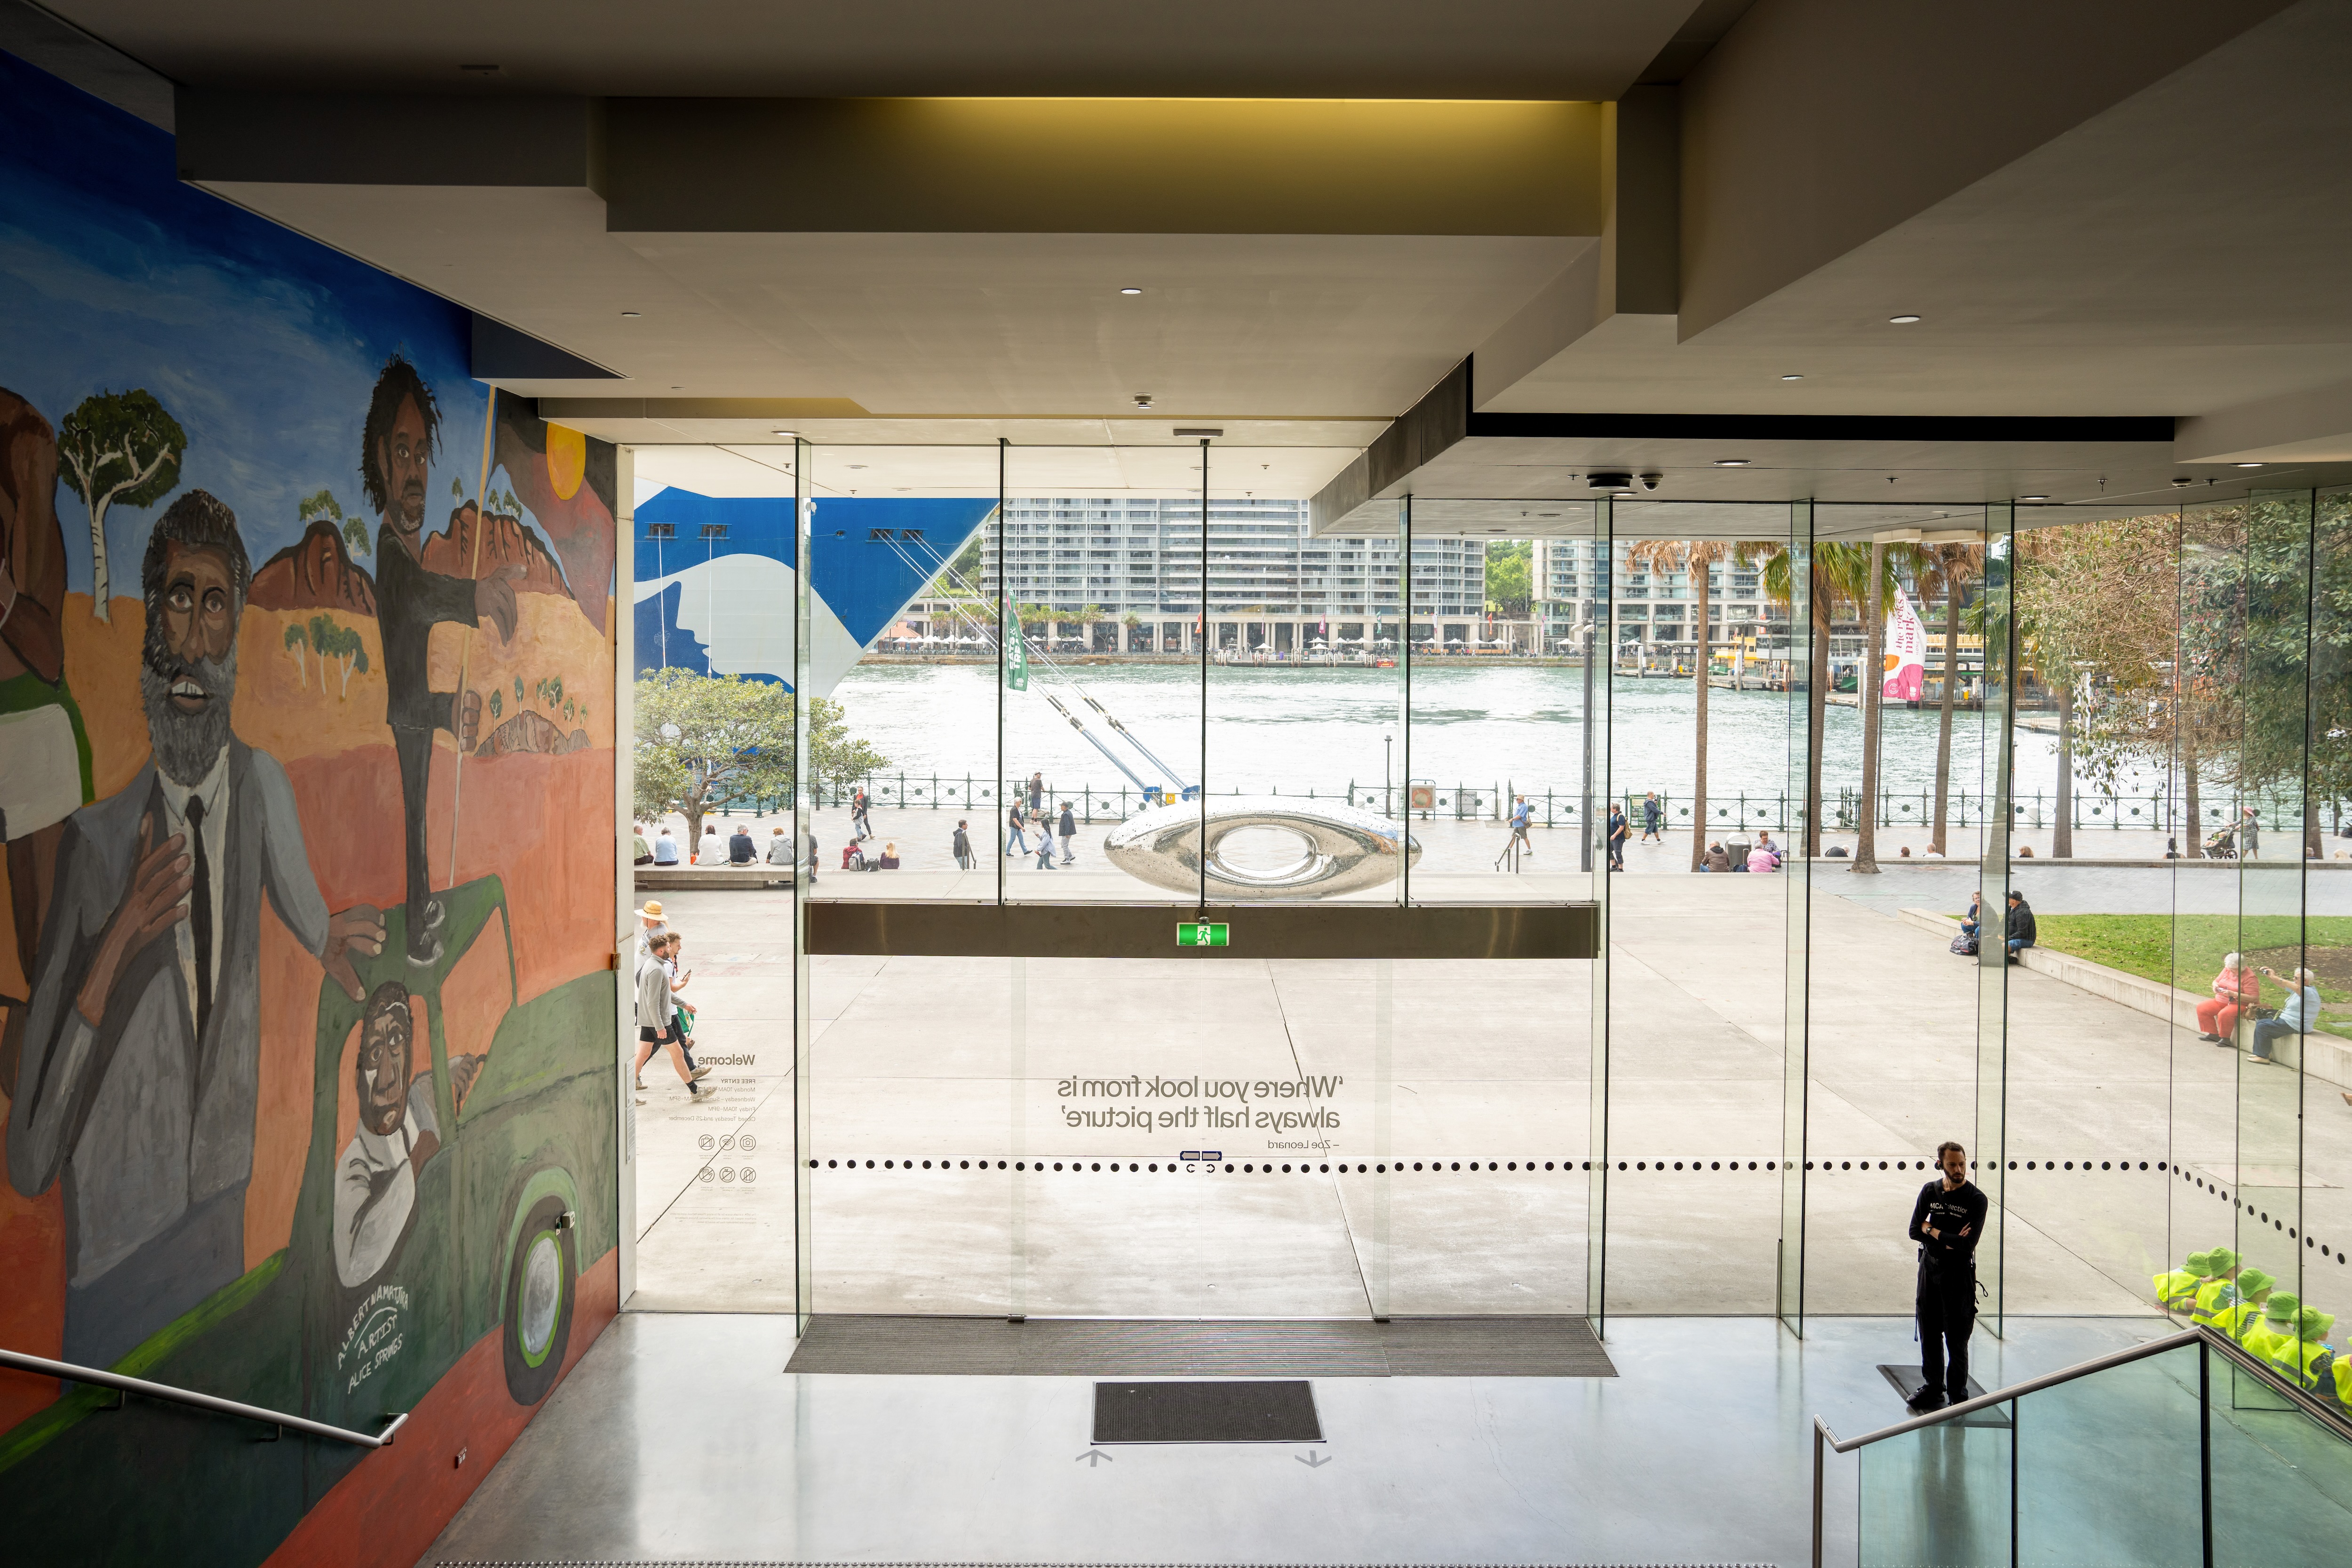 Enjoy a day of culture and inspiration at the Museum of Contemporary Art of Australia